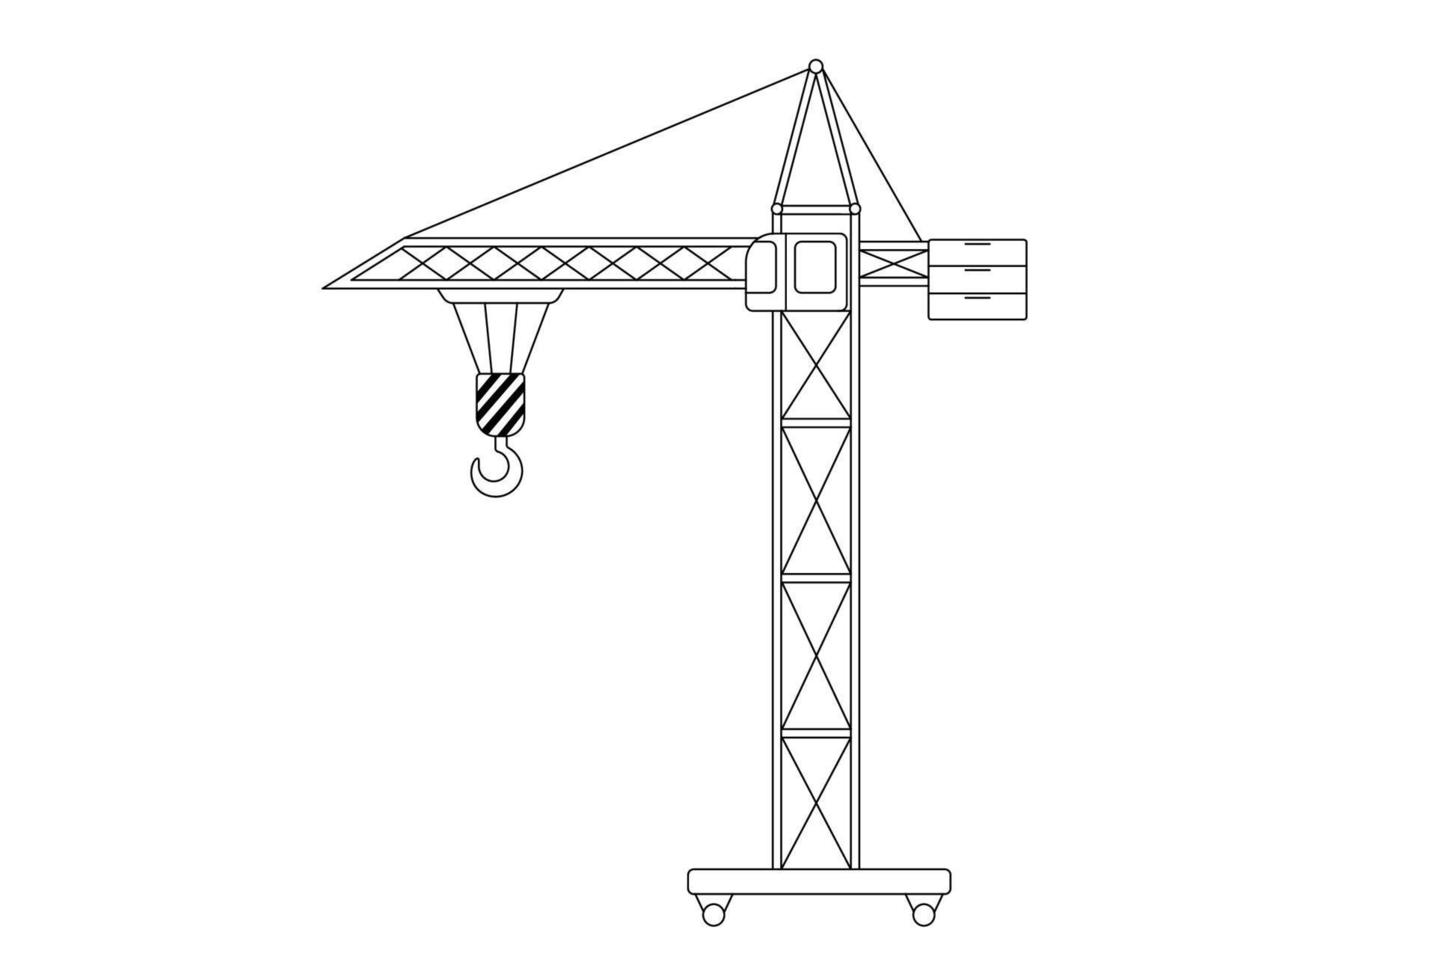 Construction crane. Outline illustration isolated on white background. Childish cute construction vehicle vector